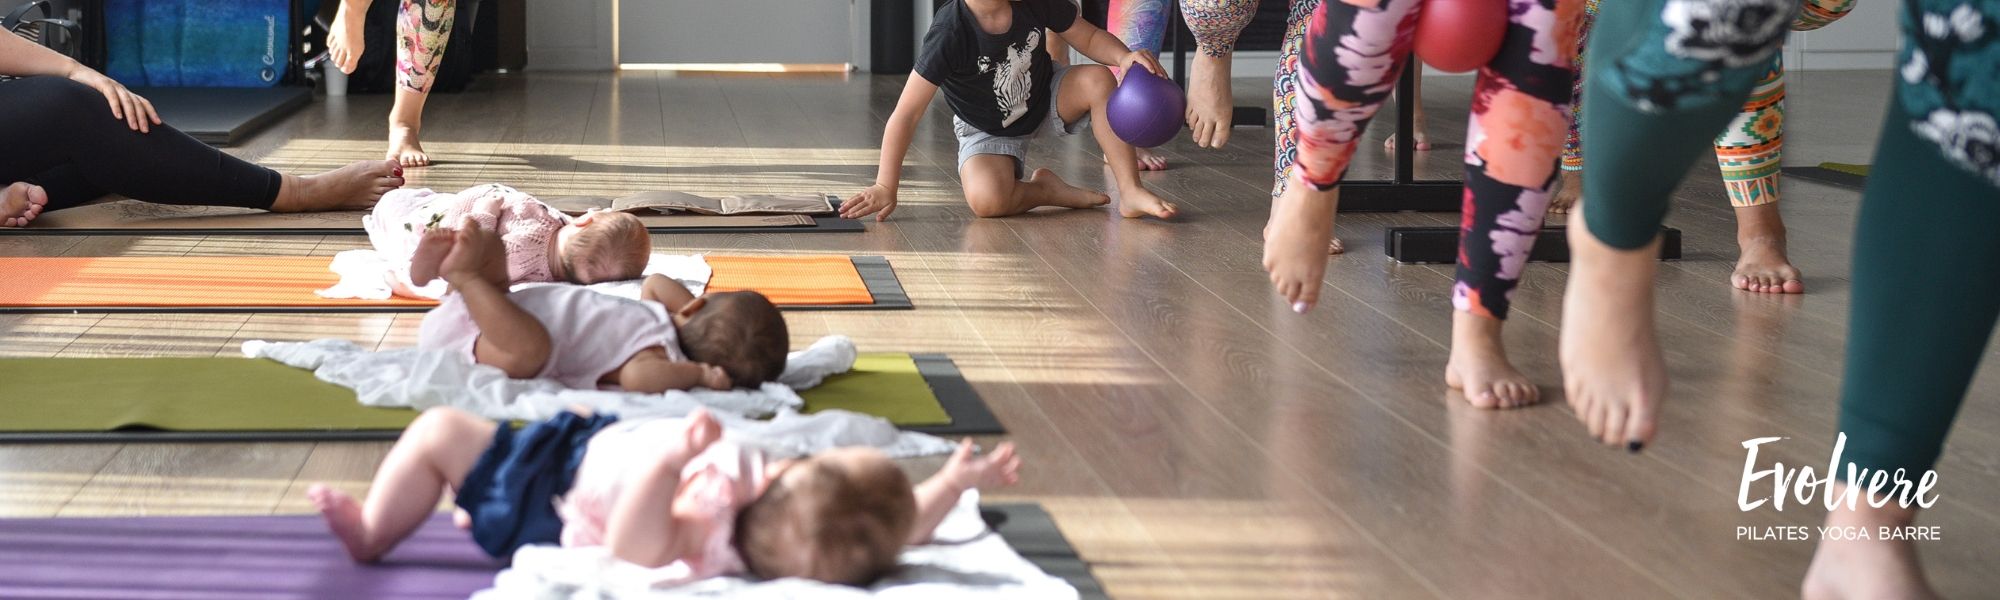 Best Postnatal Mums and Bubs classes in Sydney at Evolvere Barre studio in Lane Cove